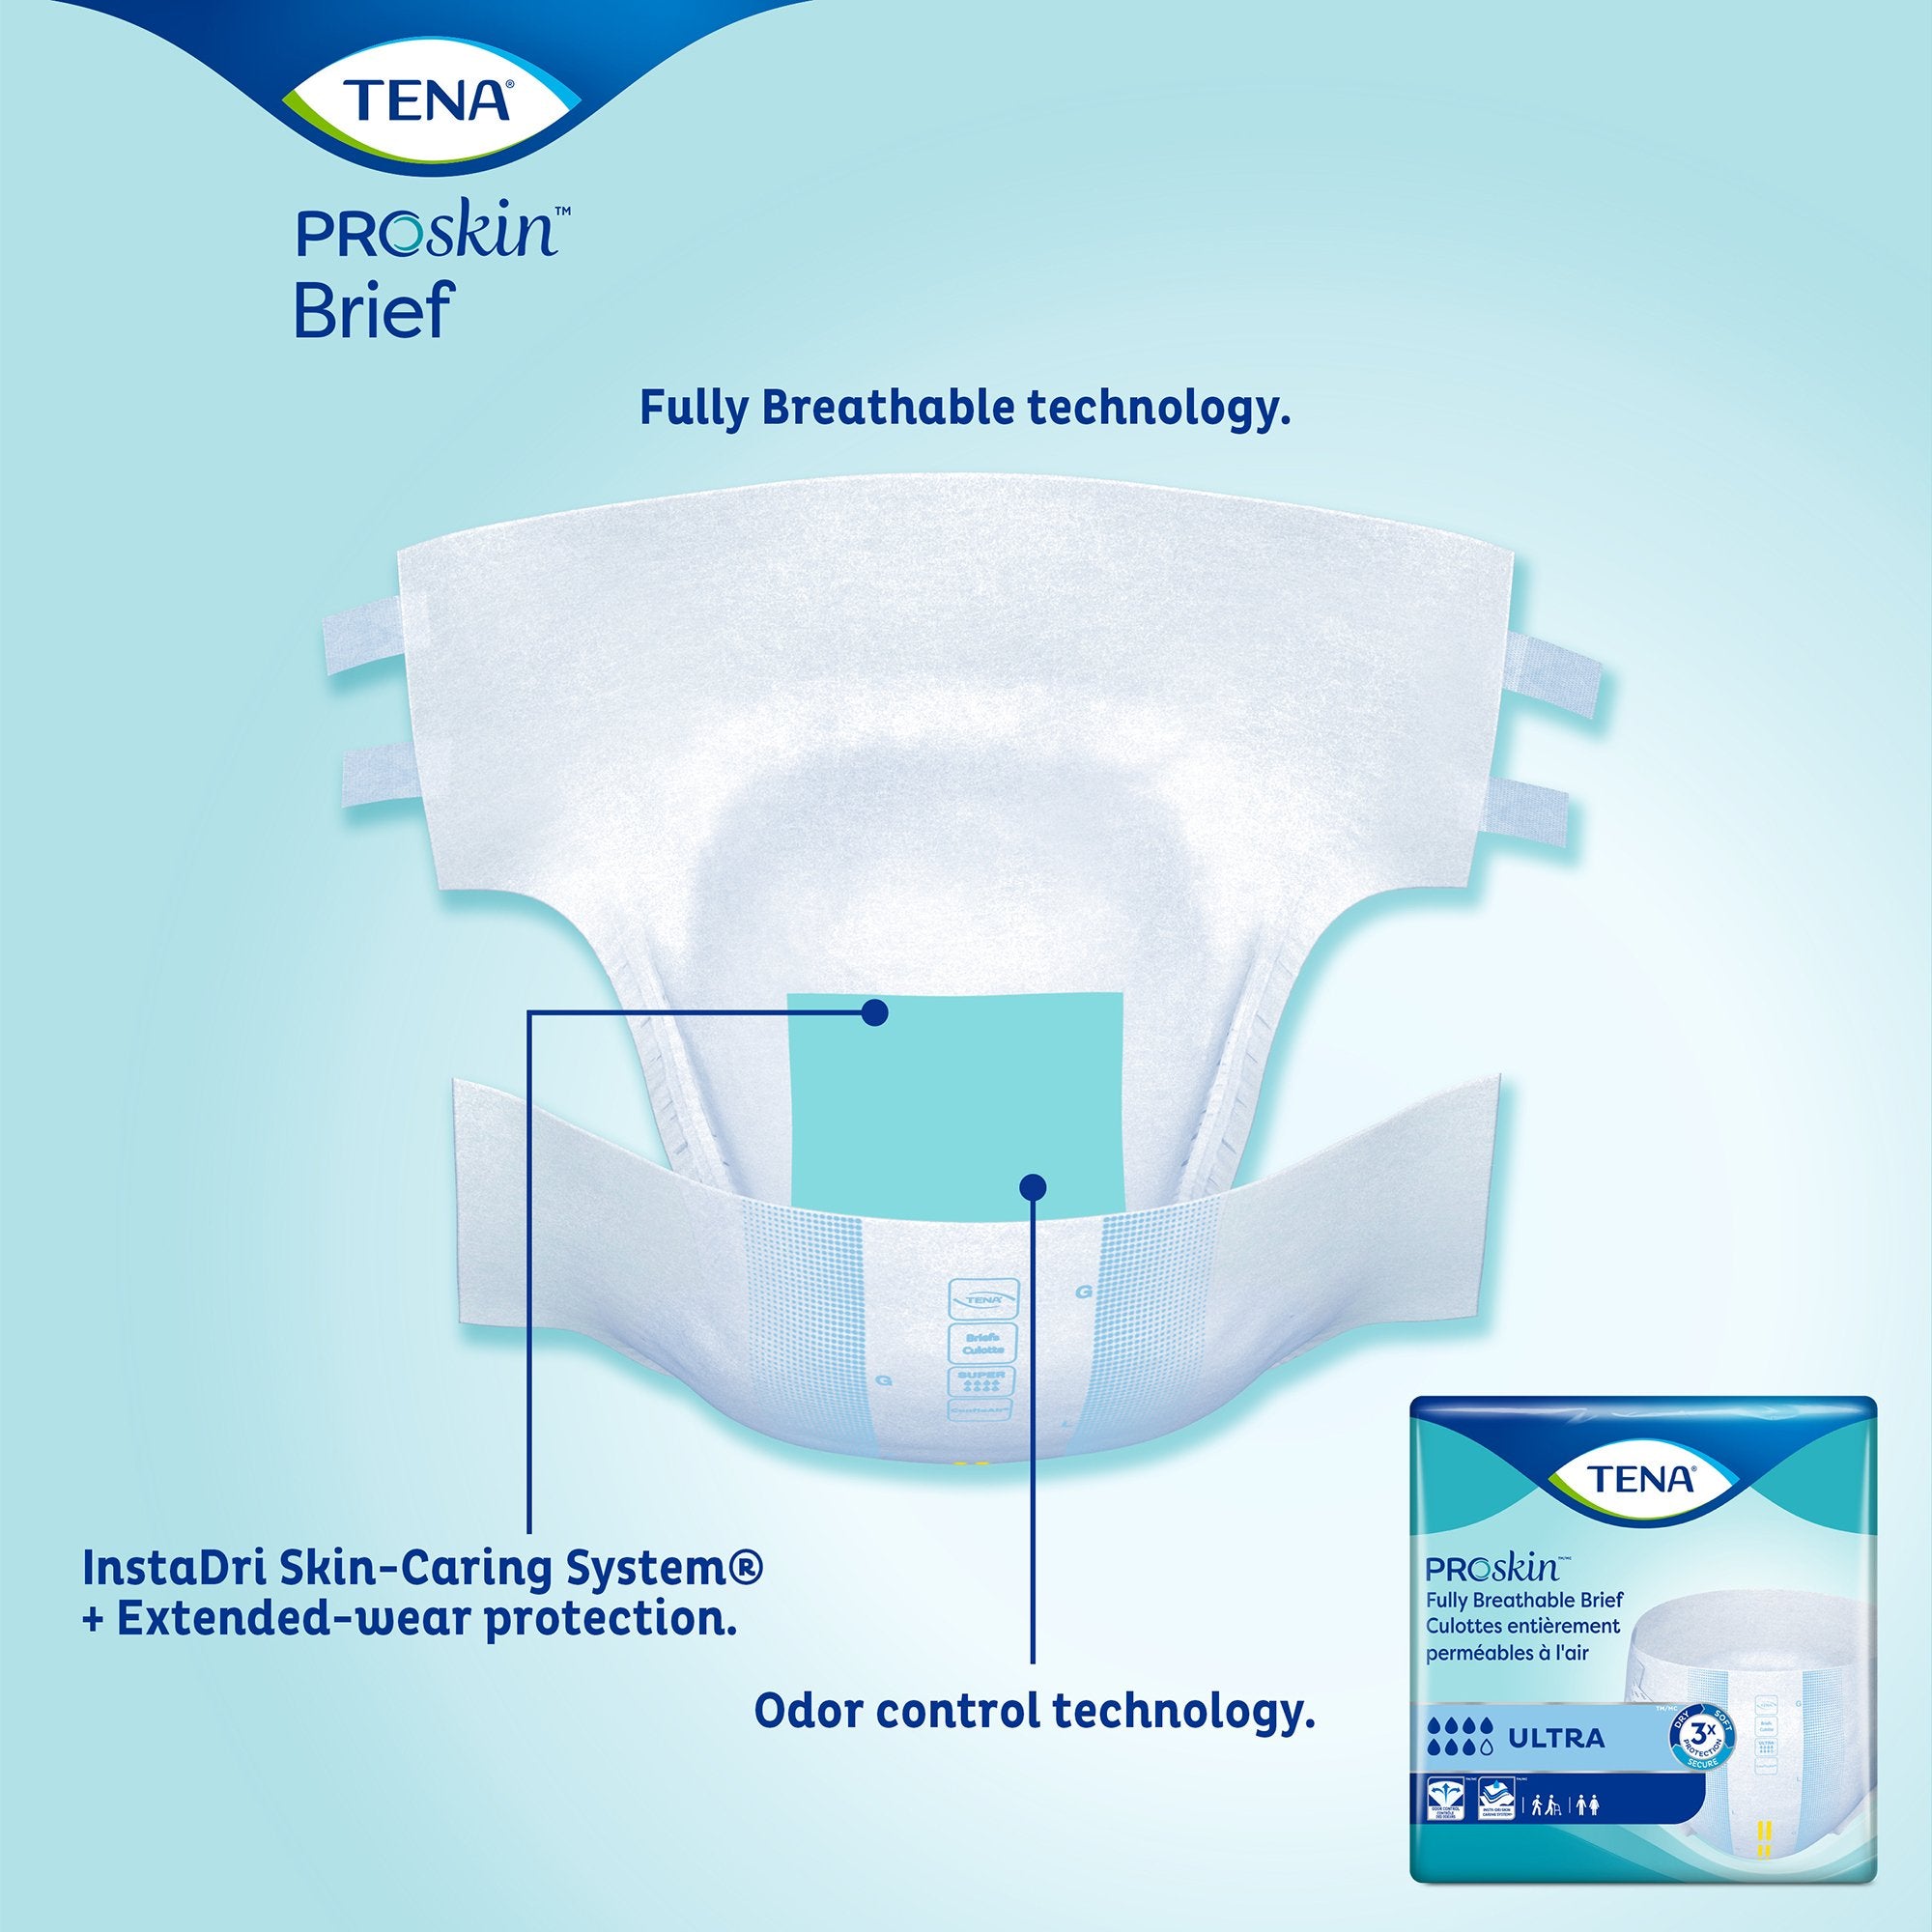 Unisex Adult Incontinence Brief TENA ProSkin Ultra X-Large Disposable Heavy Absorbency